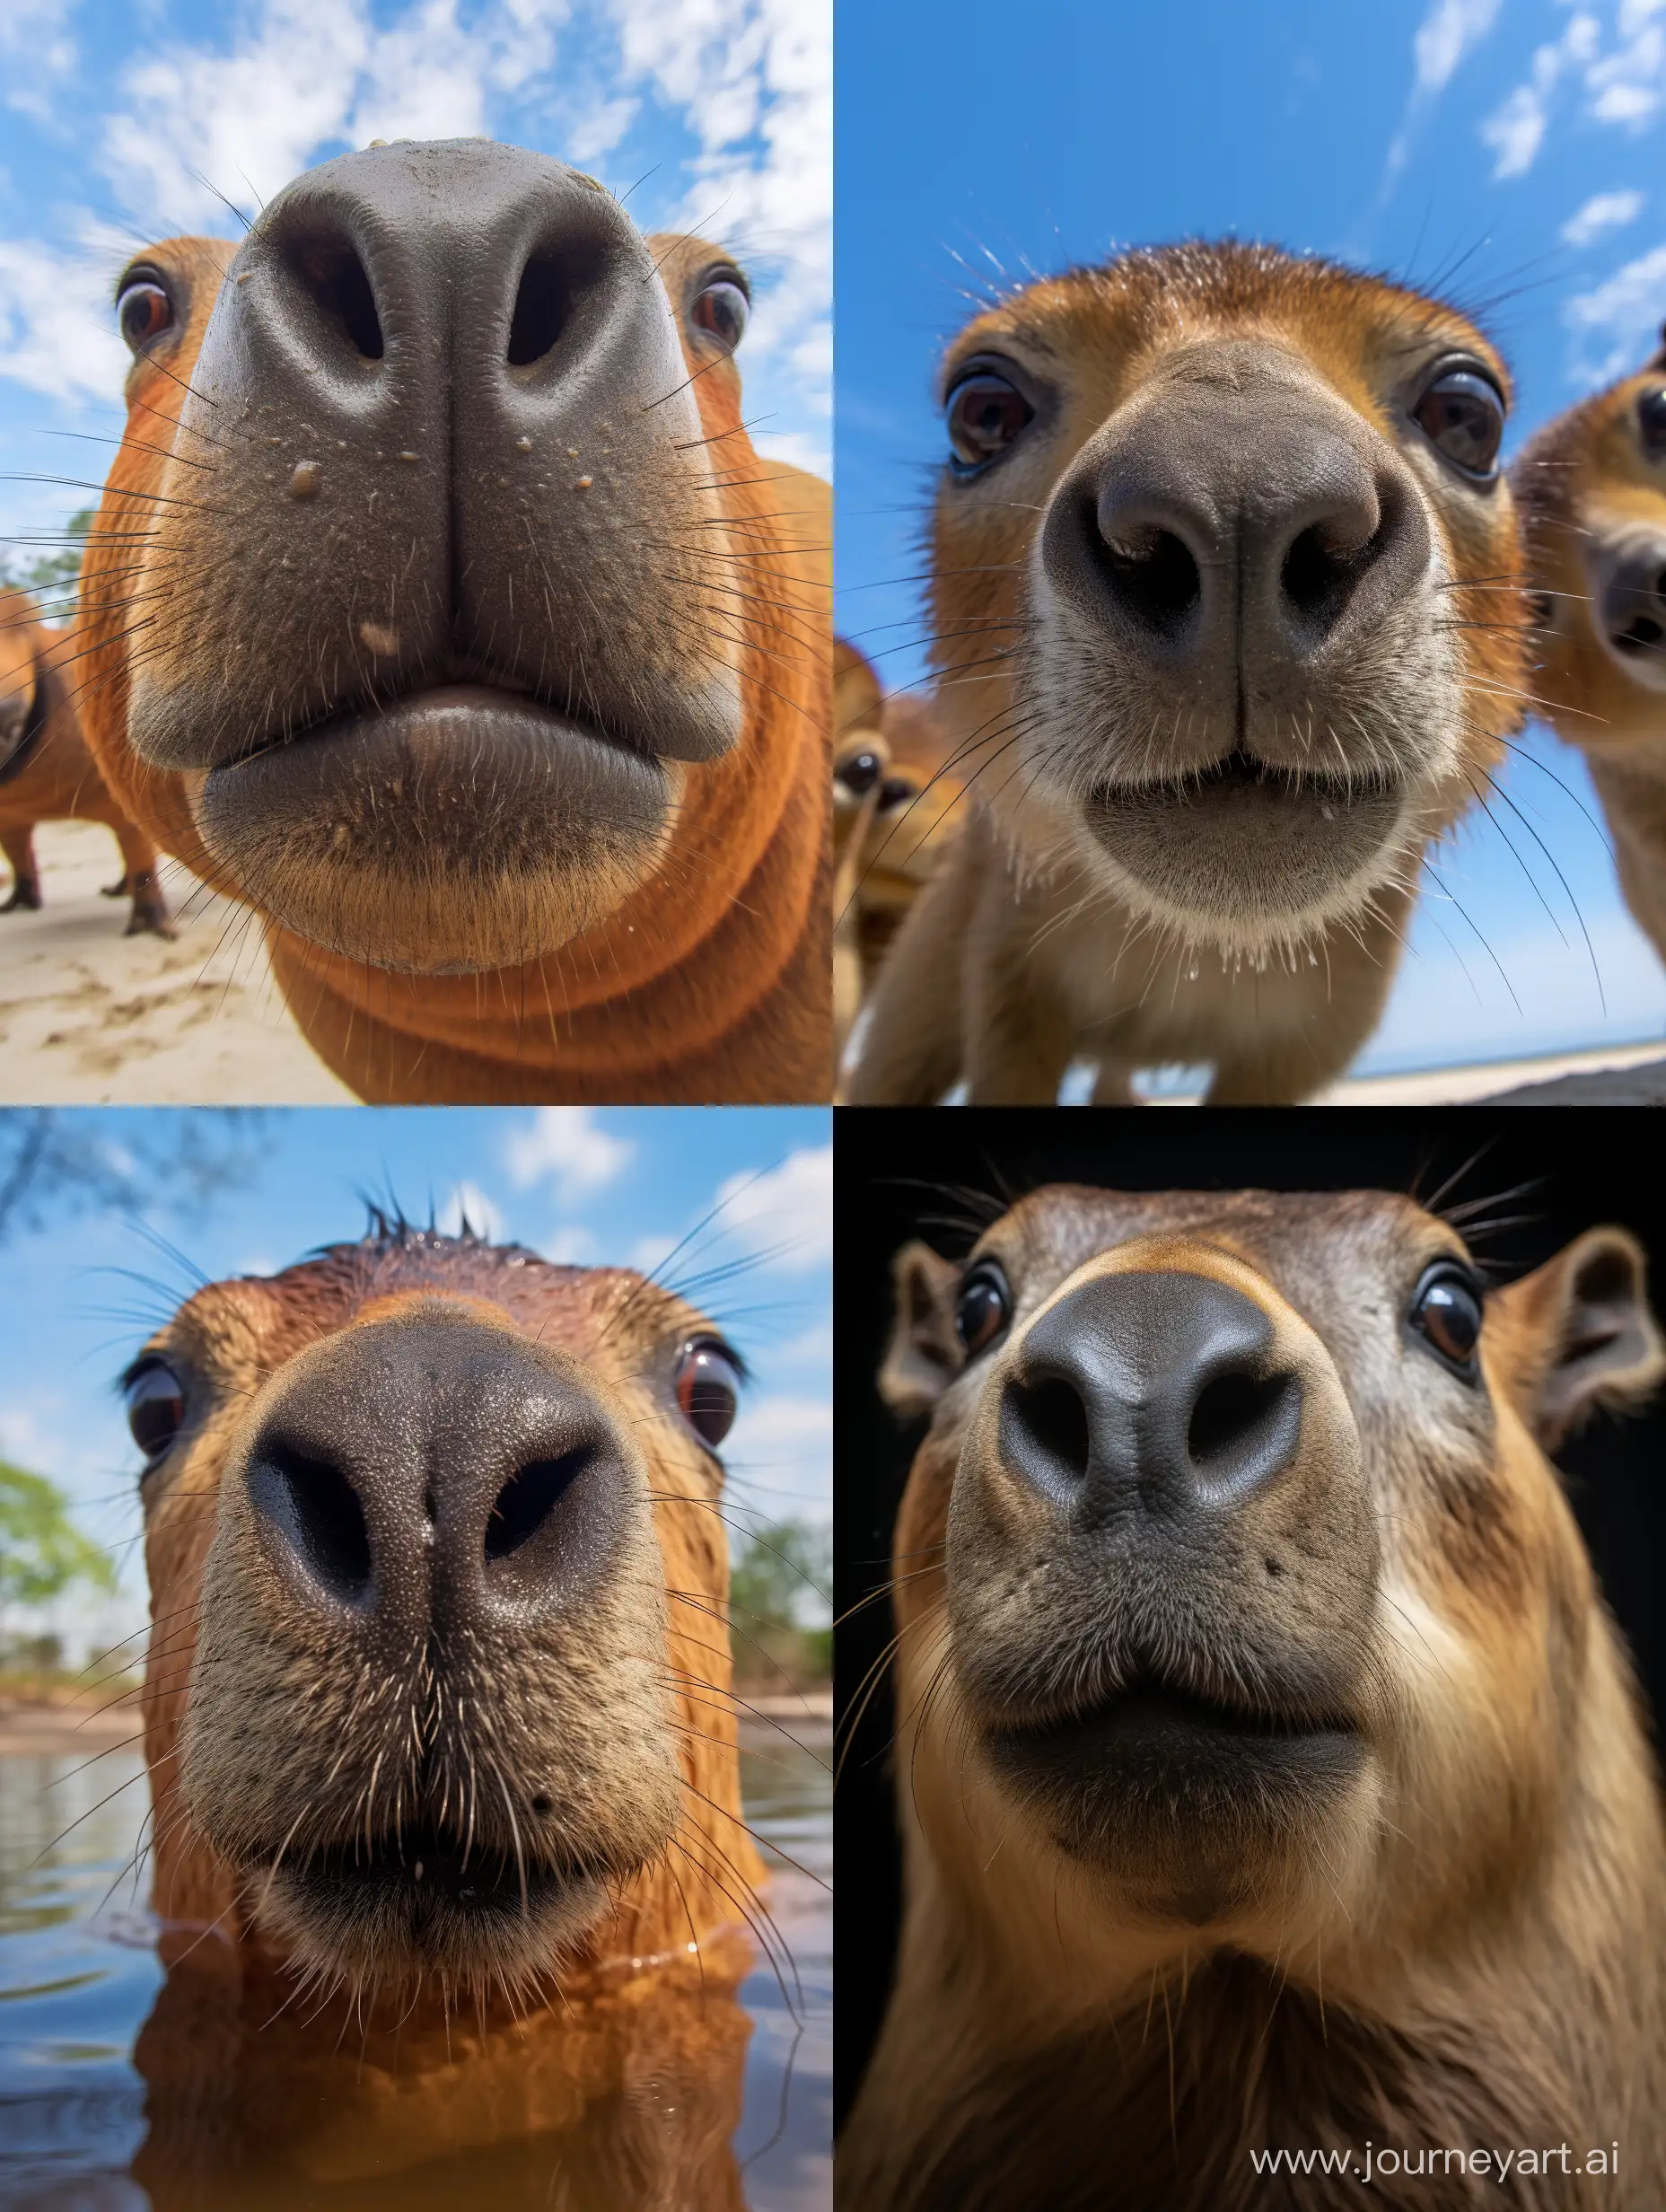 Professional-Capybara-Portrait-in-Full-Detail-Unique-BottomUp-View